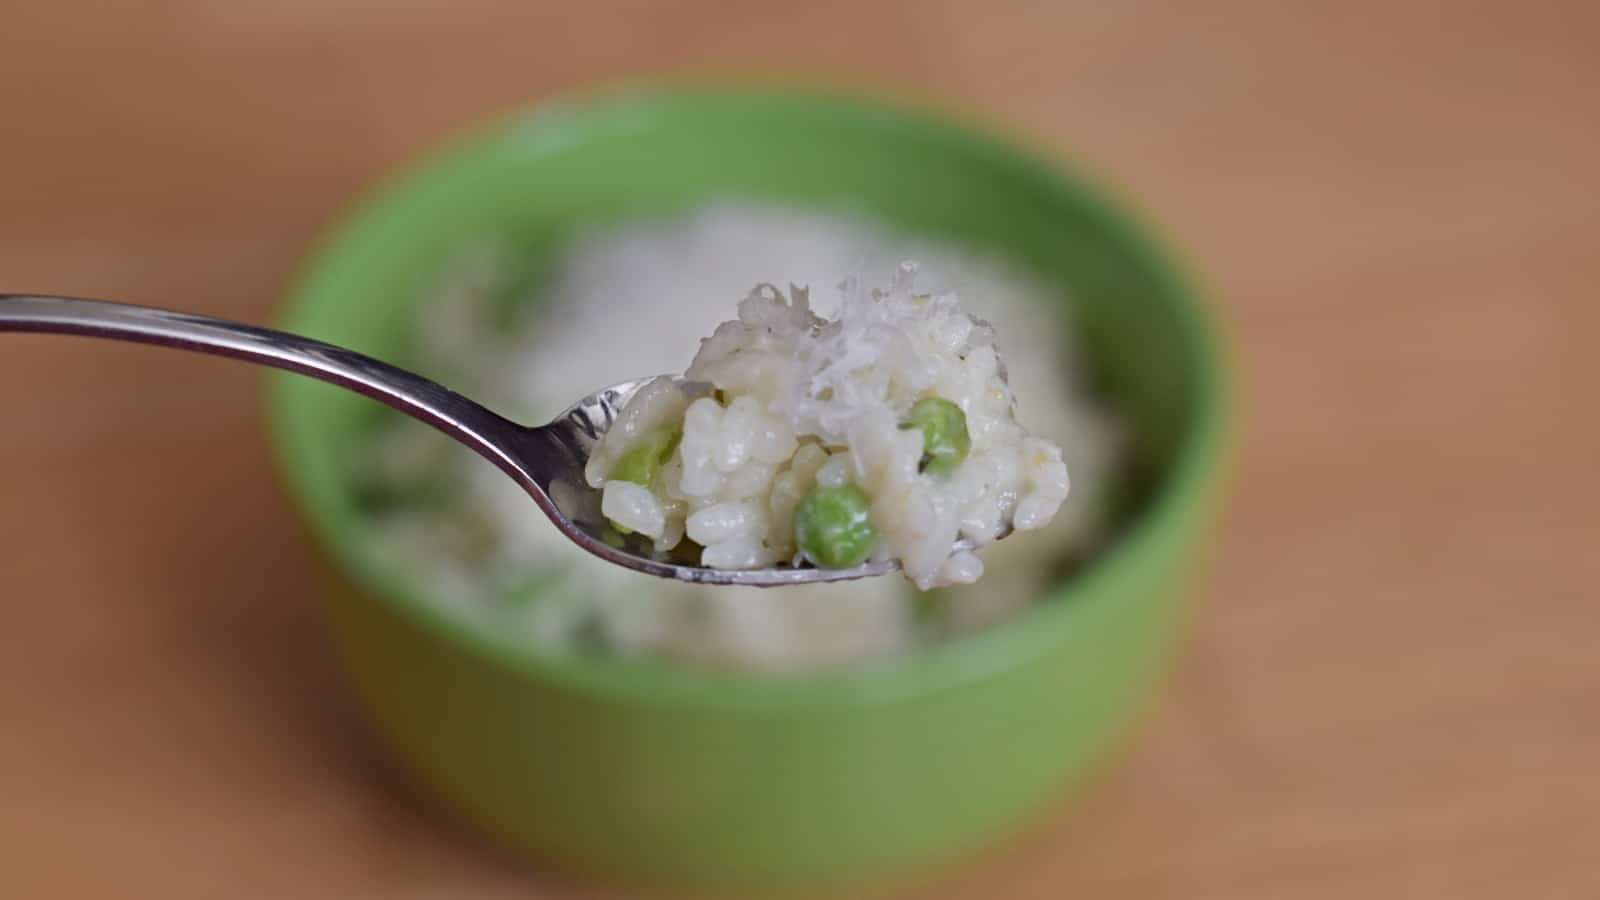 Image shows a Spoonful of risotto with peas and lemon with the rest of the bowl in the background.